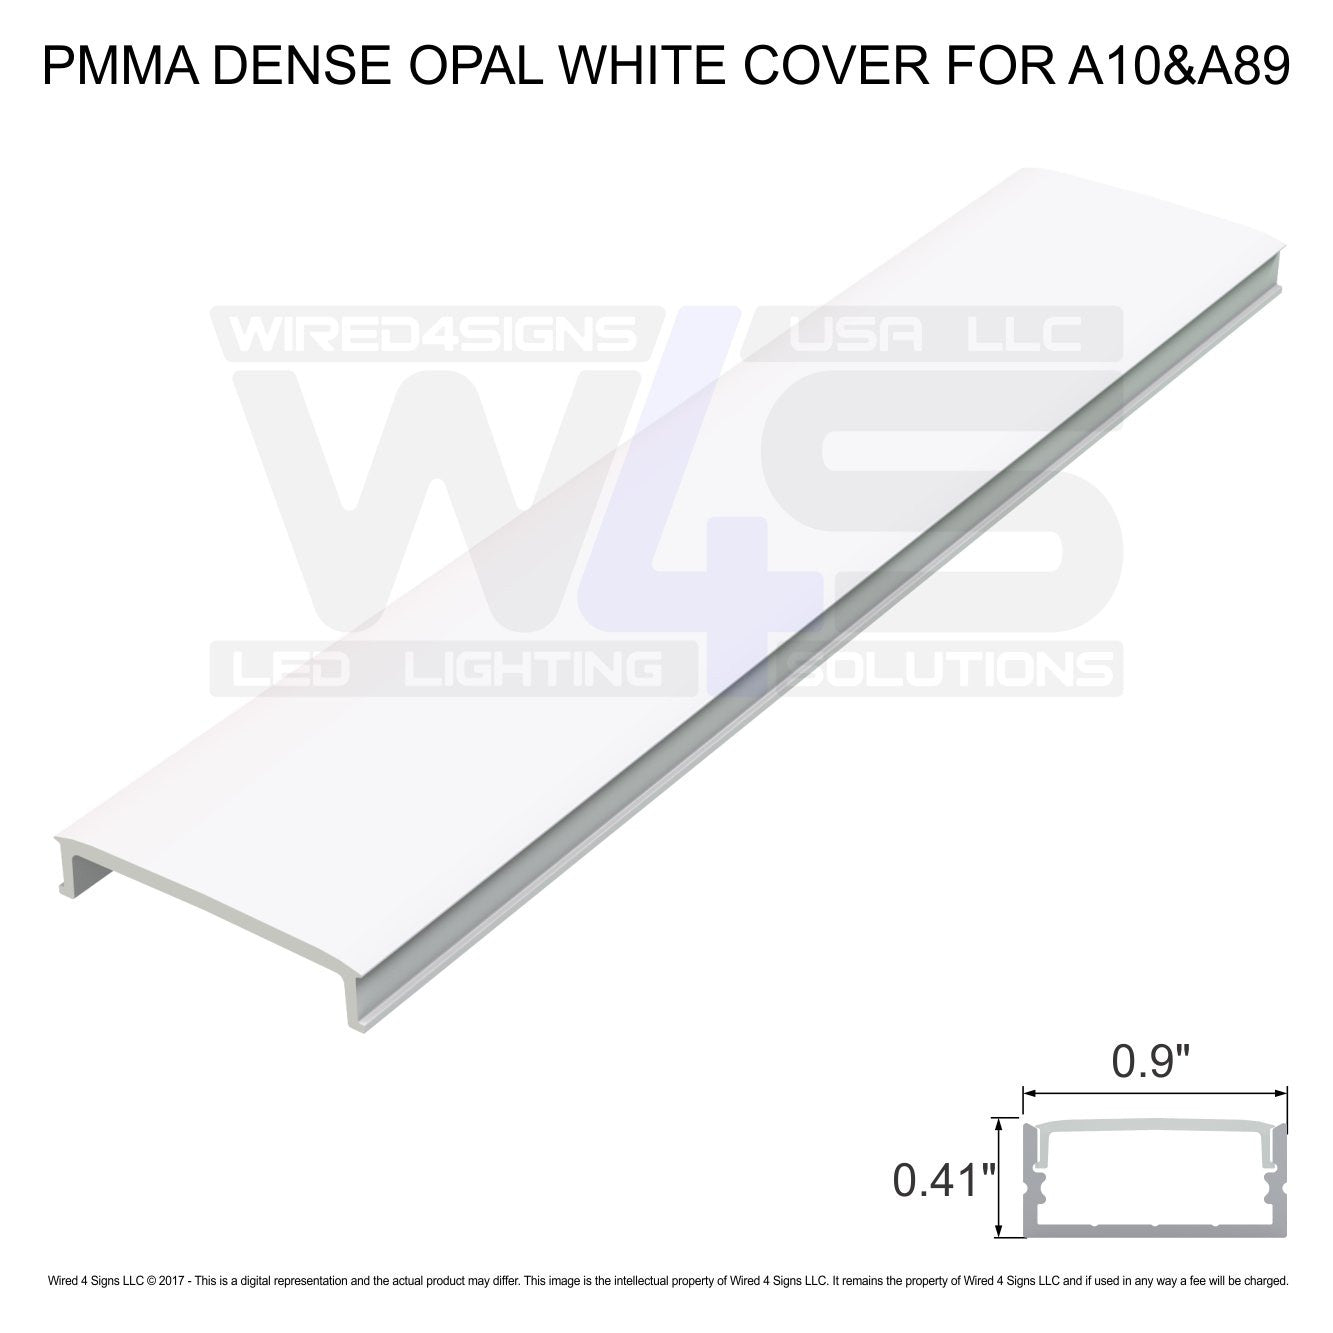 PMMA Dense Opal White cover for  A10&A89  - Dif4 (2meter/6.56ft length)